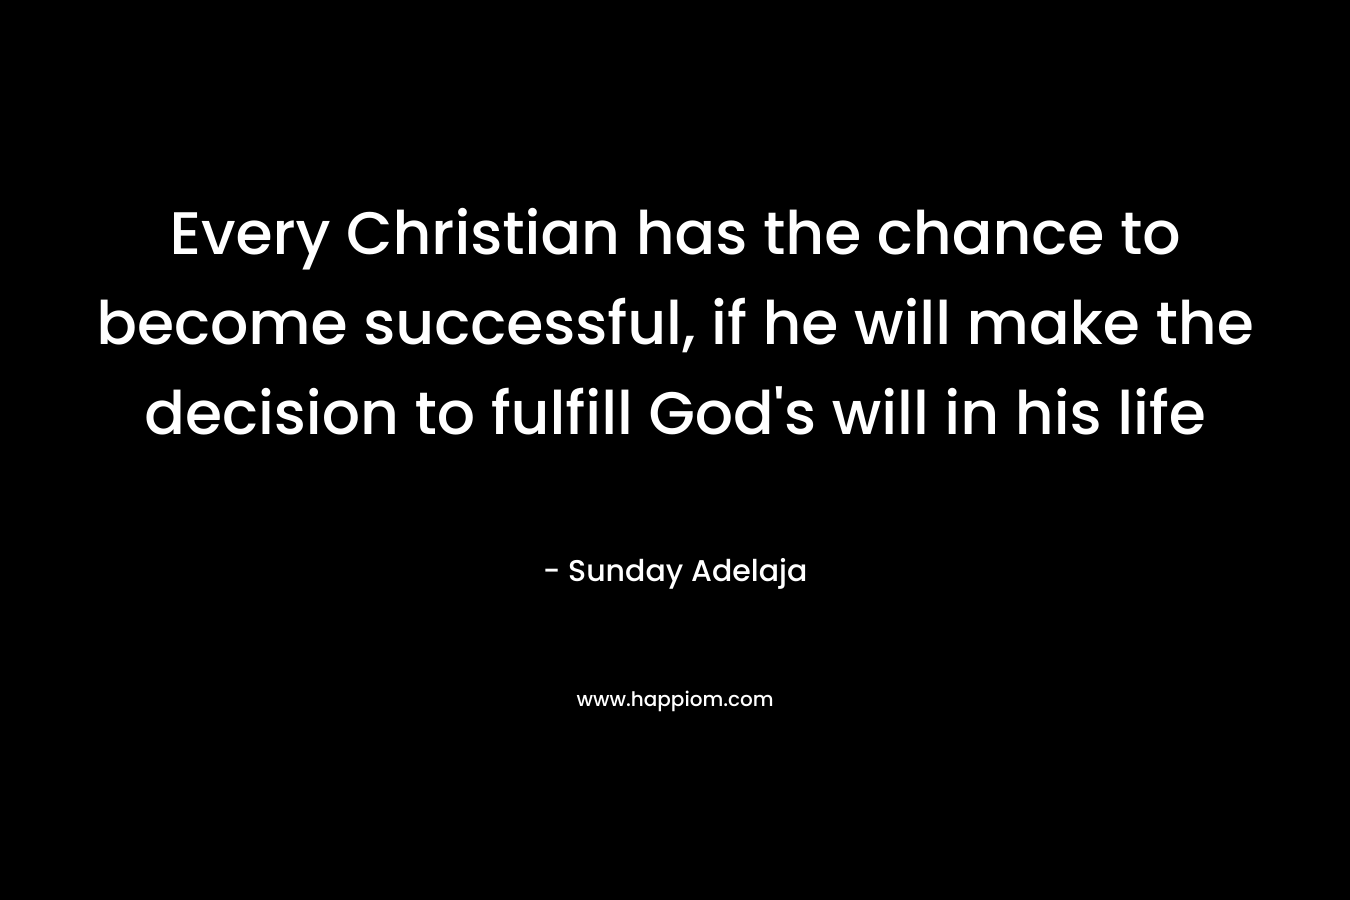 Every Christian has the chance to become successful, if he will make the decision to fulfill God's will in his life